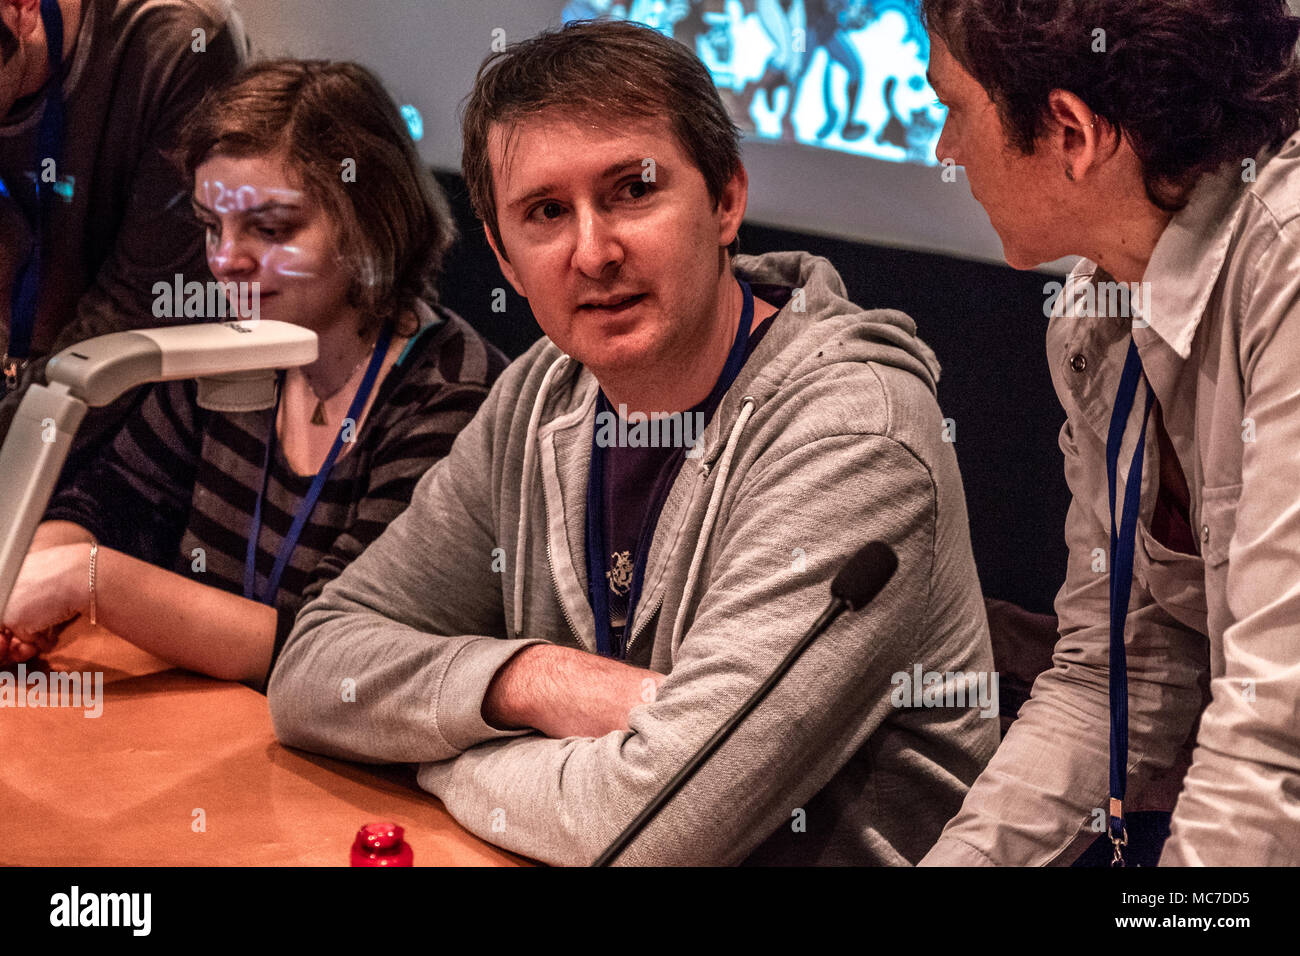 Barcelona, Spain. 13th Apr, 2018. French cartoonist Souillon, author of the character Maliki during his master class for school children. The36th Barcelona International Comic Fair from 12th-15th April 2018 in Fira Barcelona Montjuïc. Credit: SOPA Images Limited/Alamy Live News Stock Photo